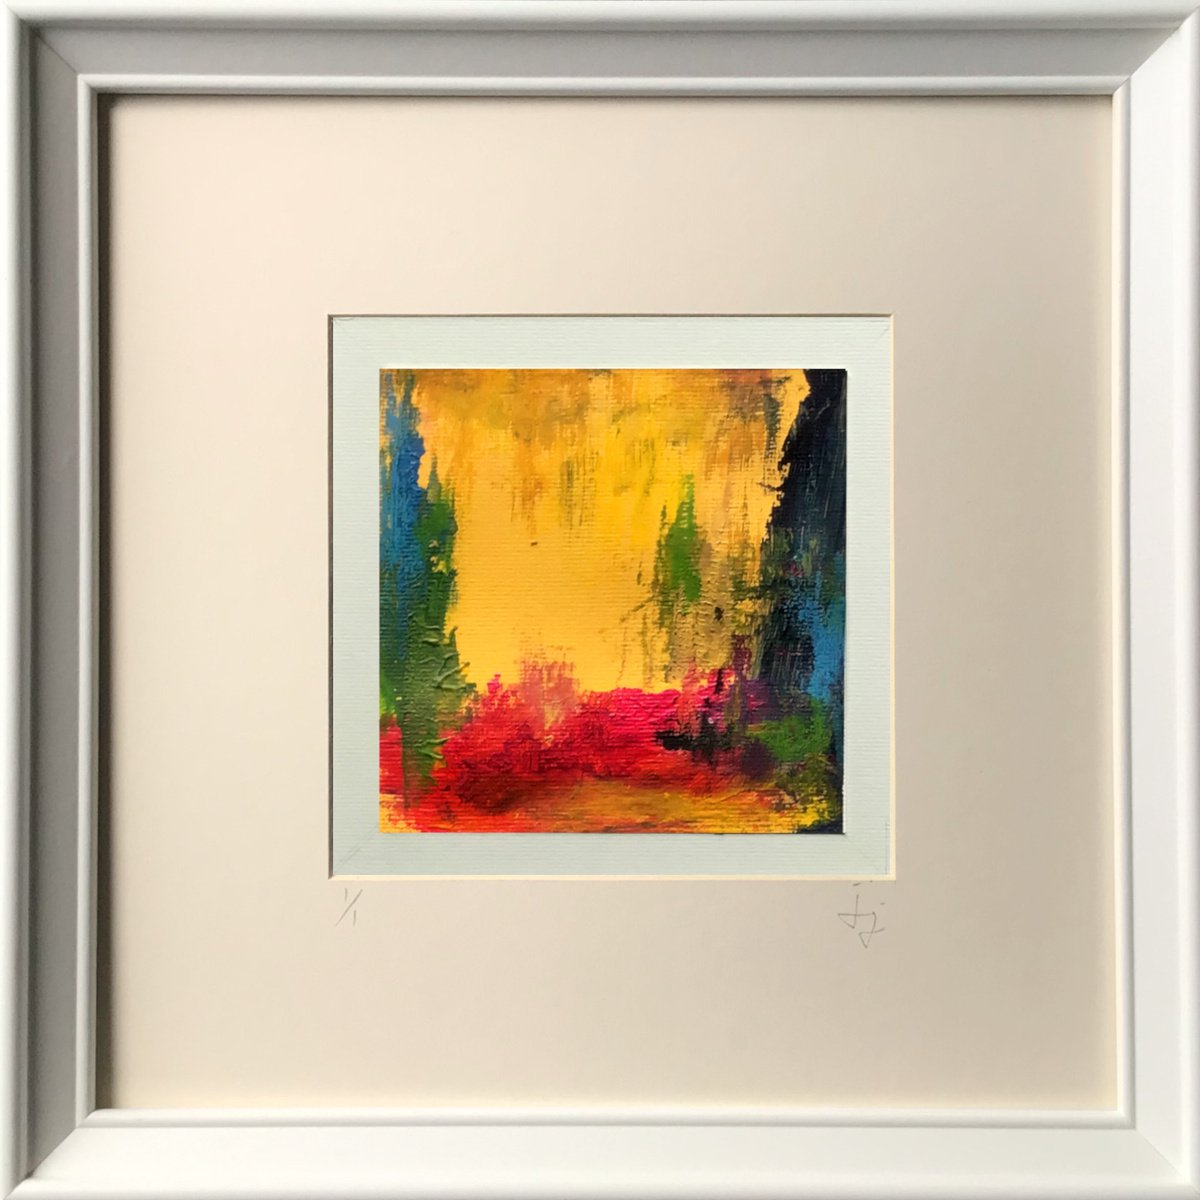 Fuse 2 (Yellow) - Framed, ready to hang painting by Jon Joseph